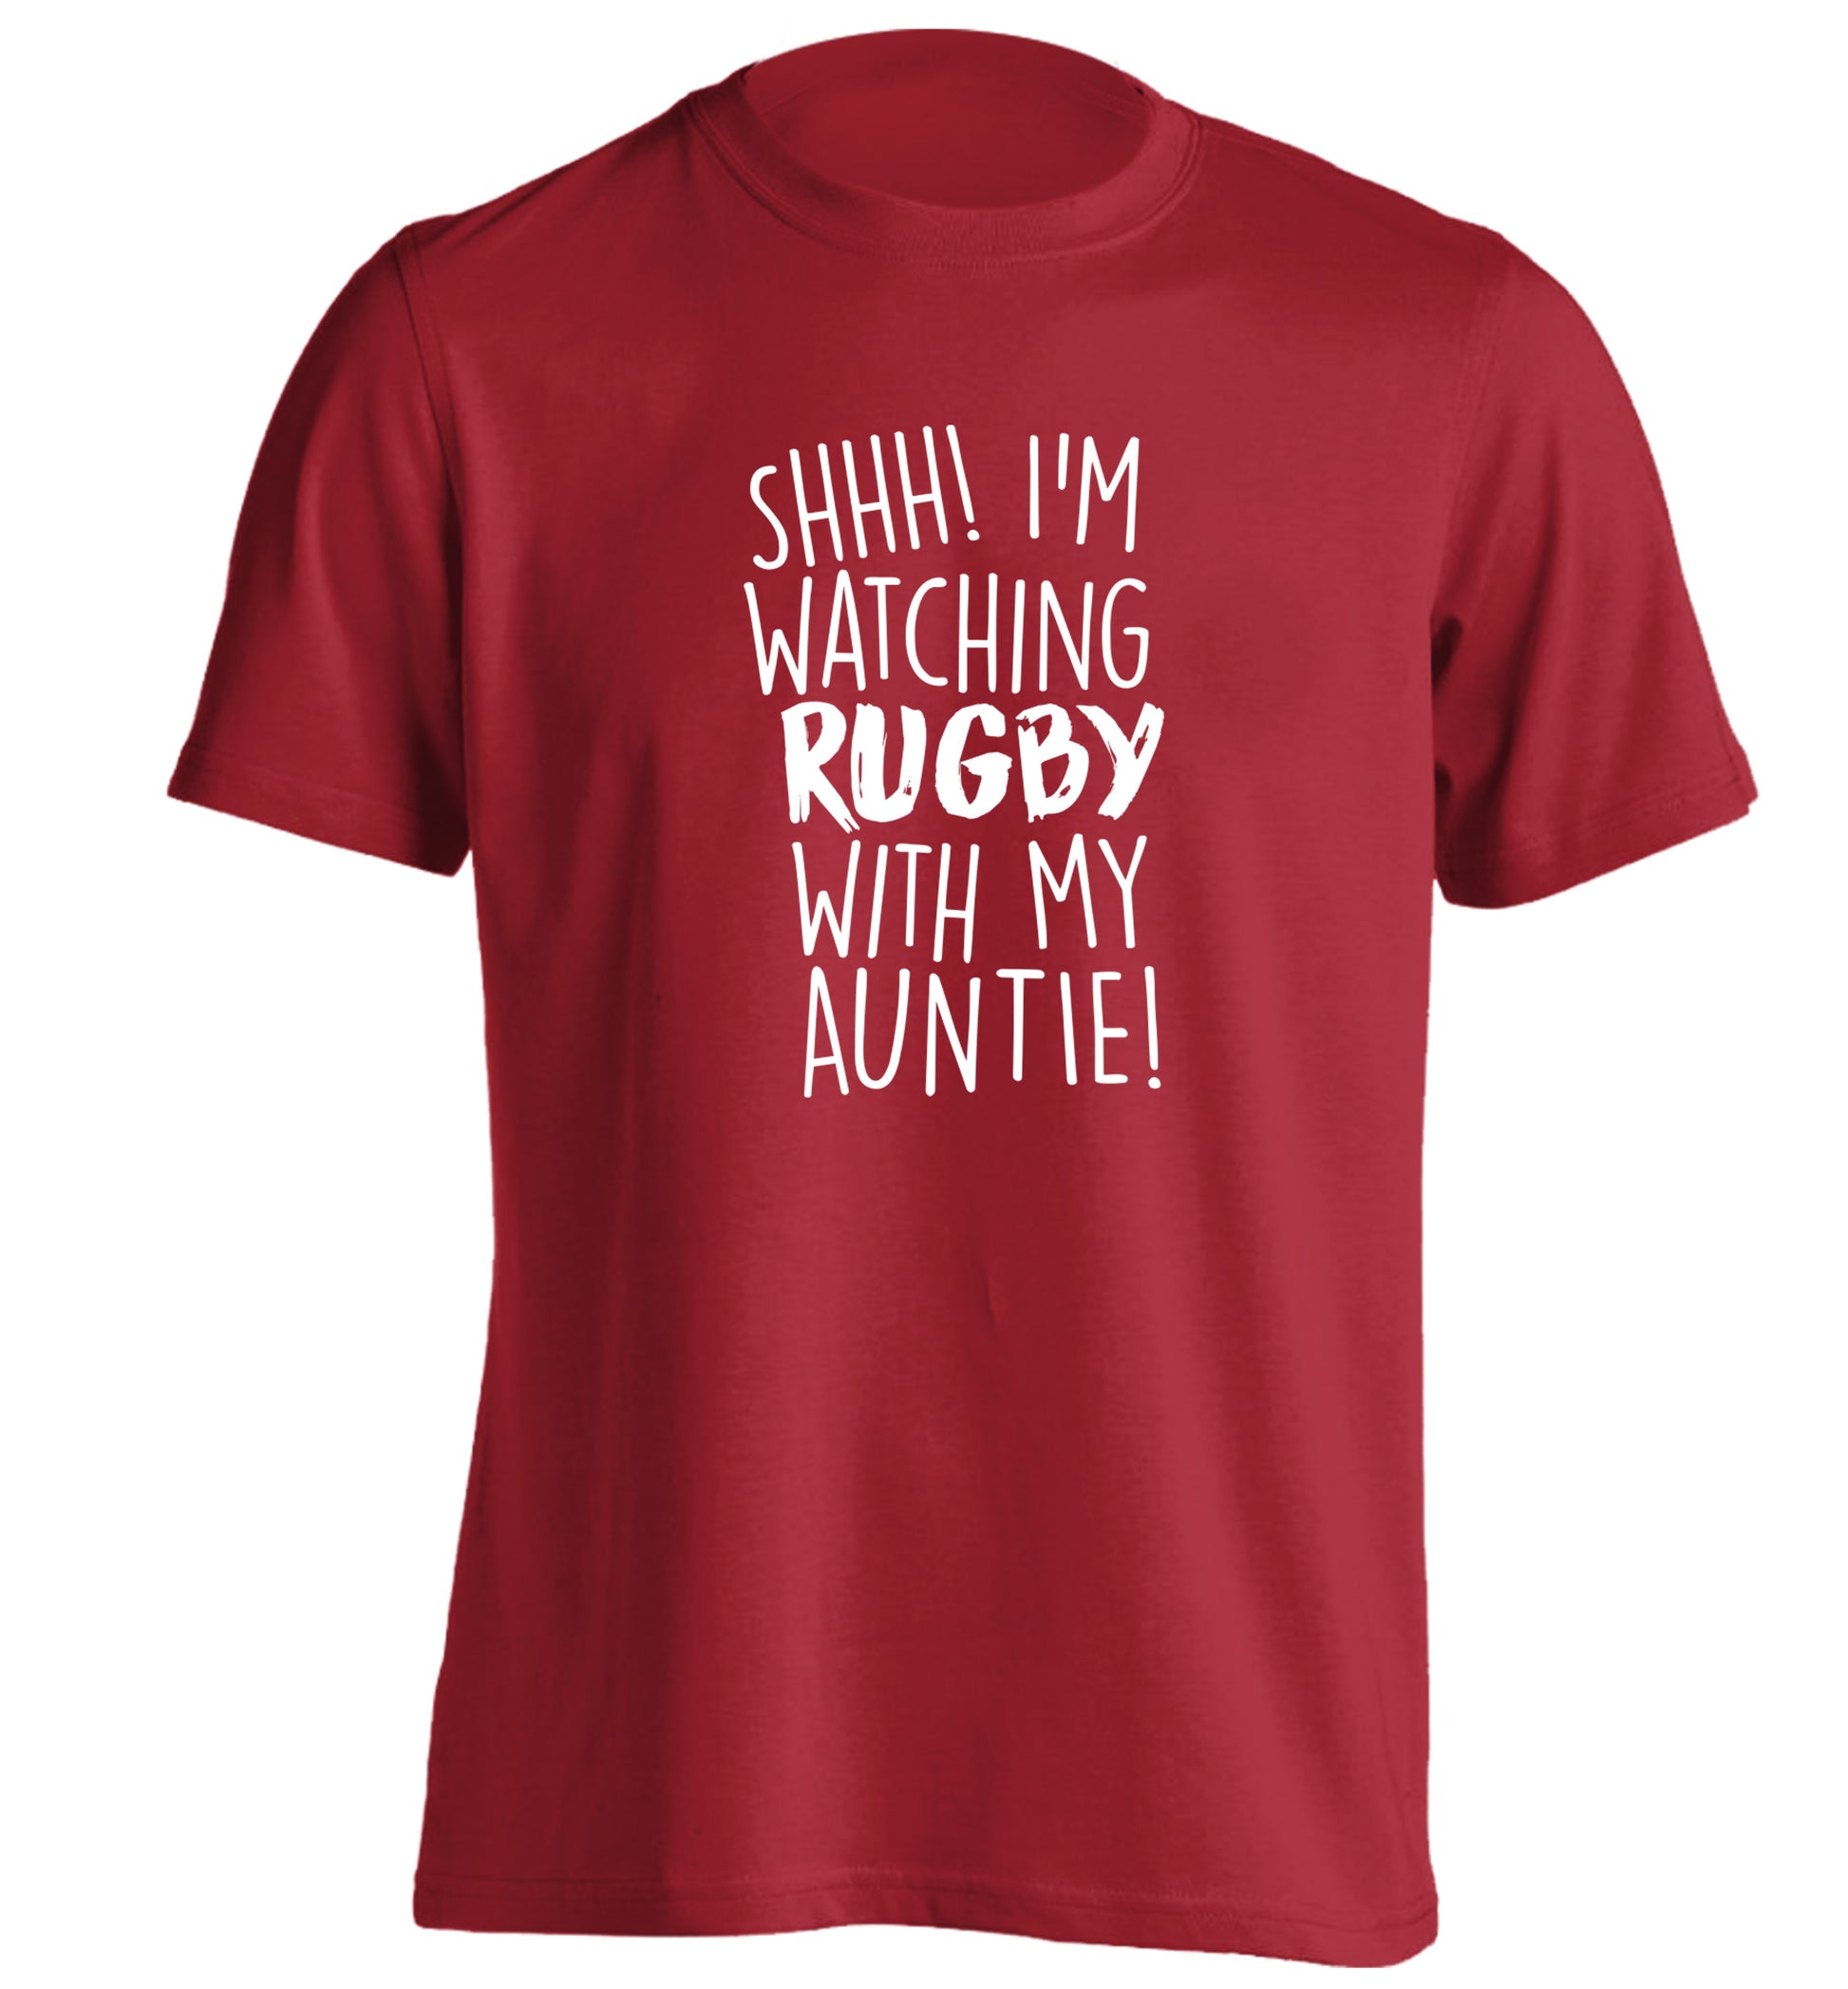 Shhh I'm watchin rugby with my auntie adults unisex red Tshirt 2XL